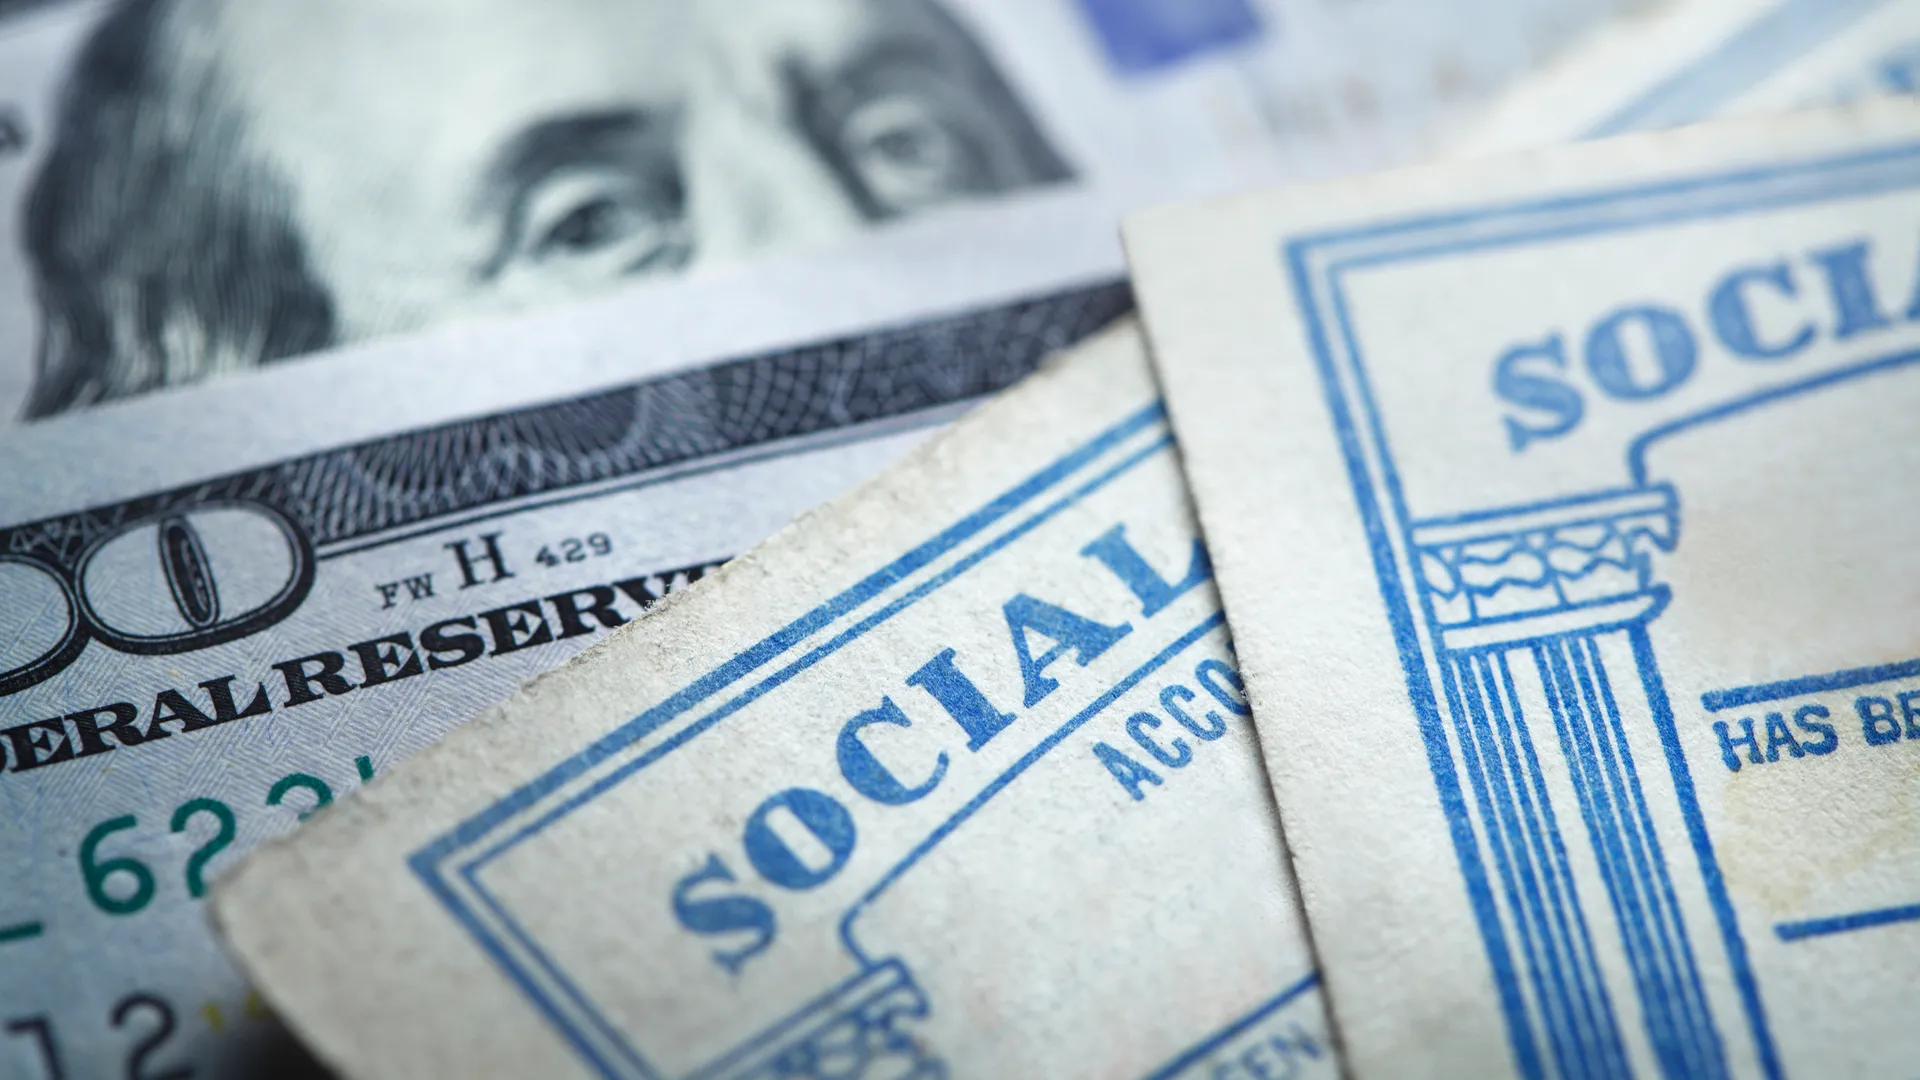 Two Social Security cards rest on top of several $100 bills.